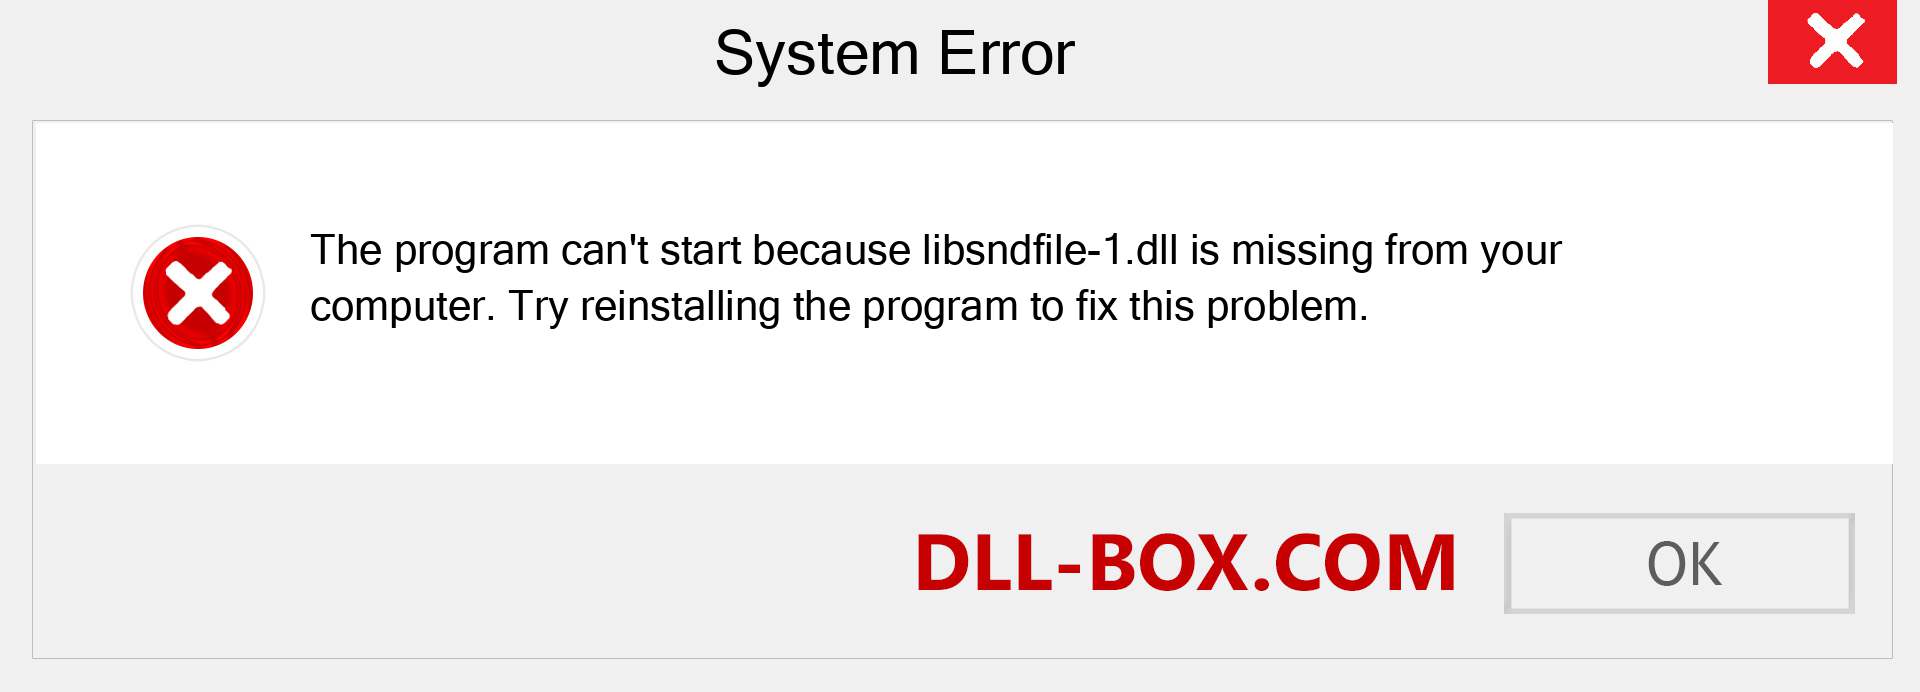  libsndfile-1.dll file is missing?. Download for Windows 7, 8, 10 - Fix  libsndfile-1 dll Missing Error on Windows, photos, images